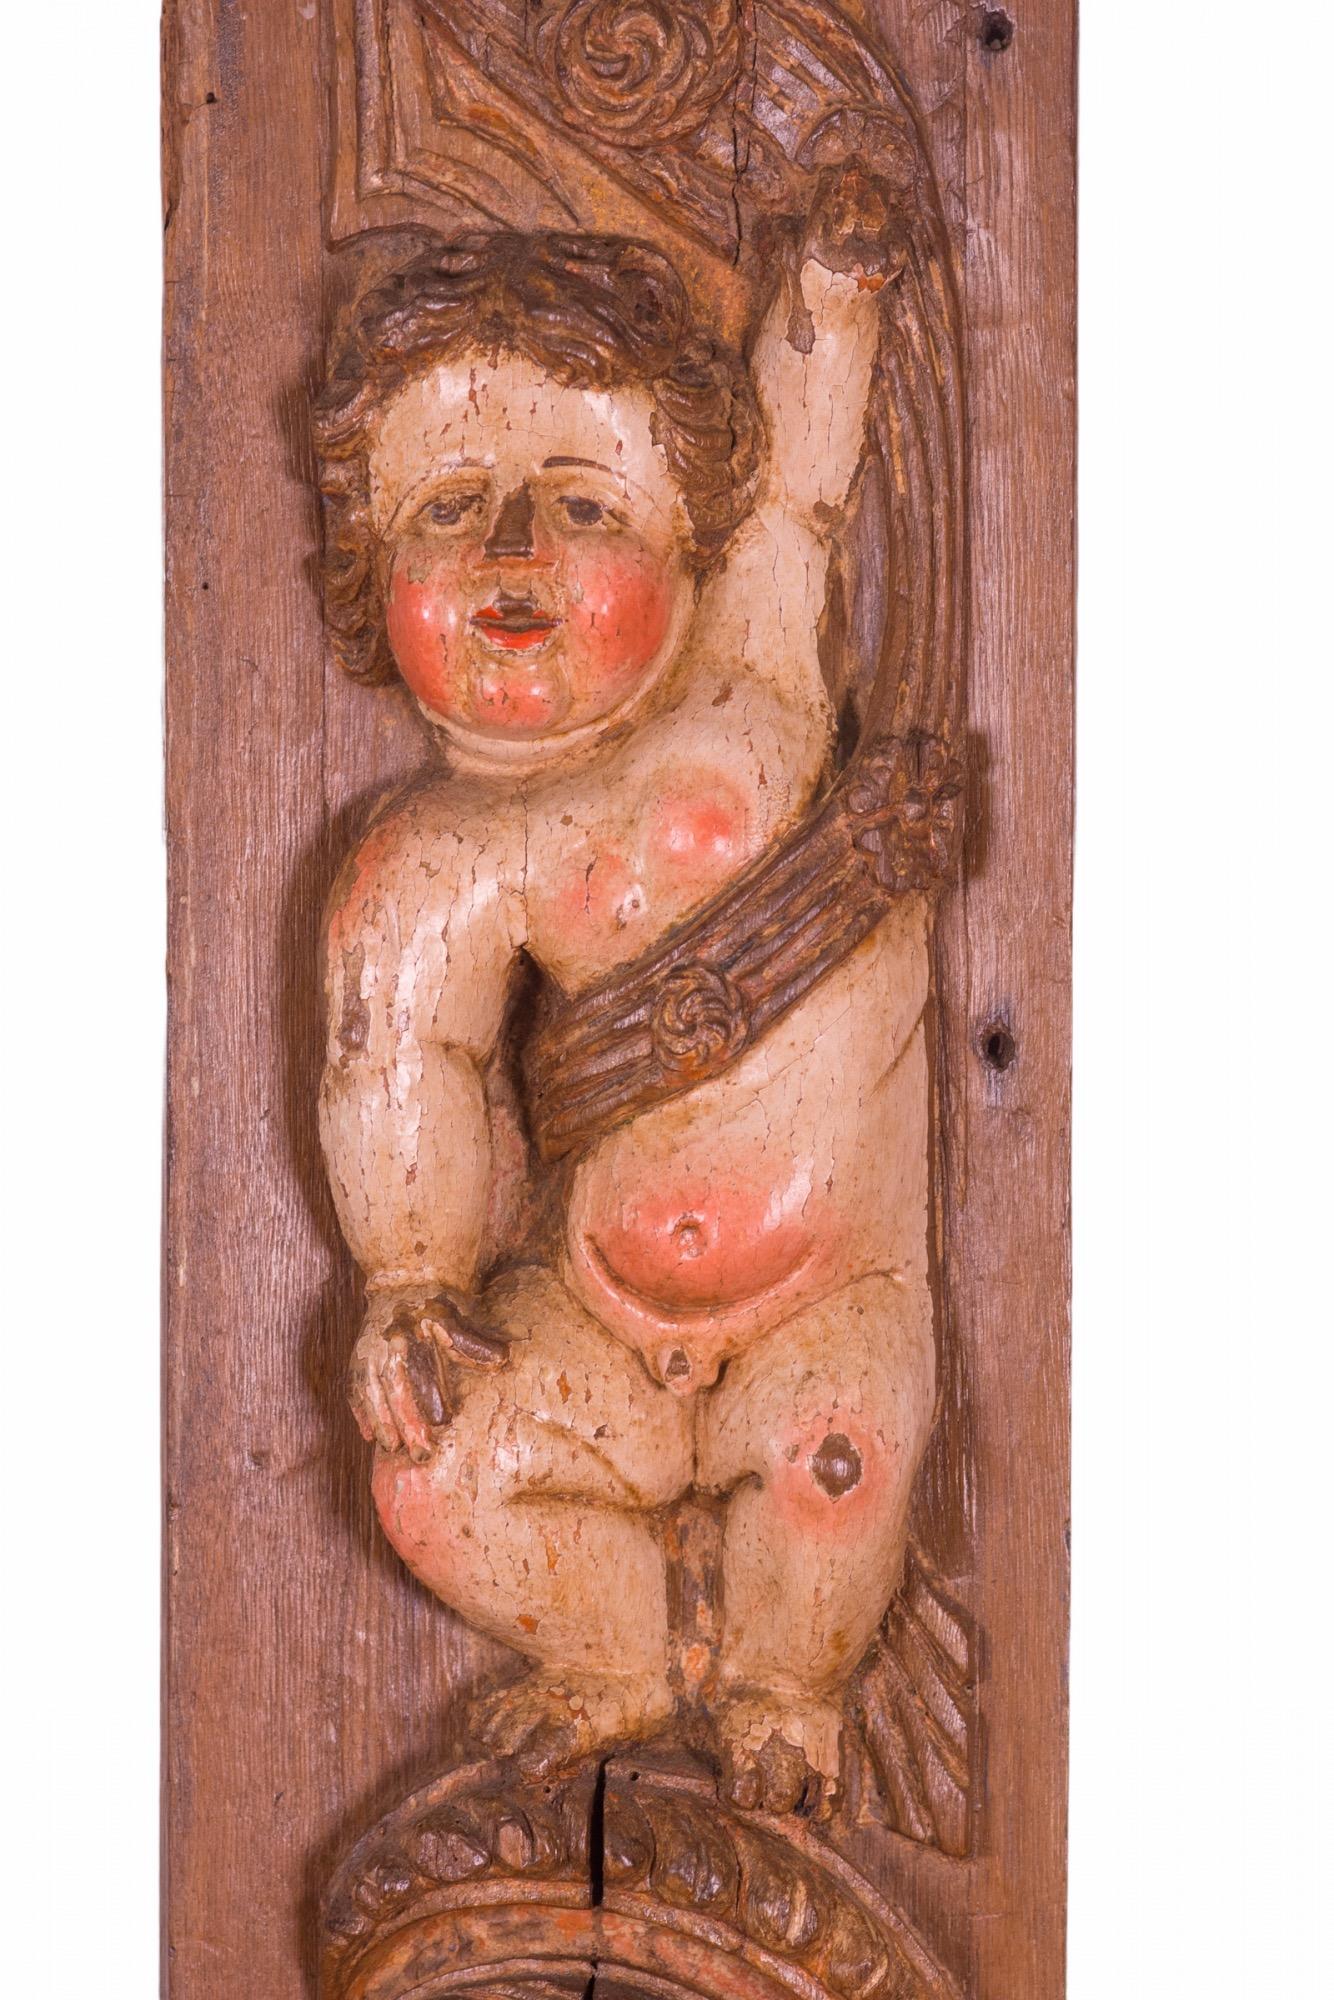 Painted Omnipresence of God, 16th Century, Carved Wood Panel